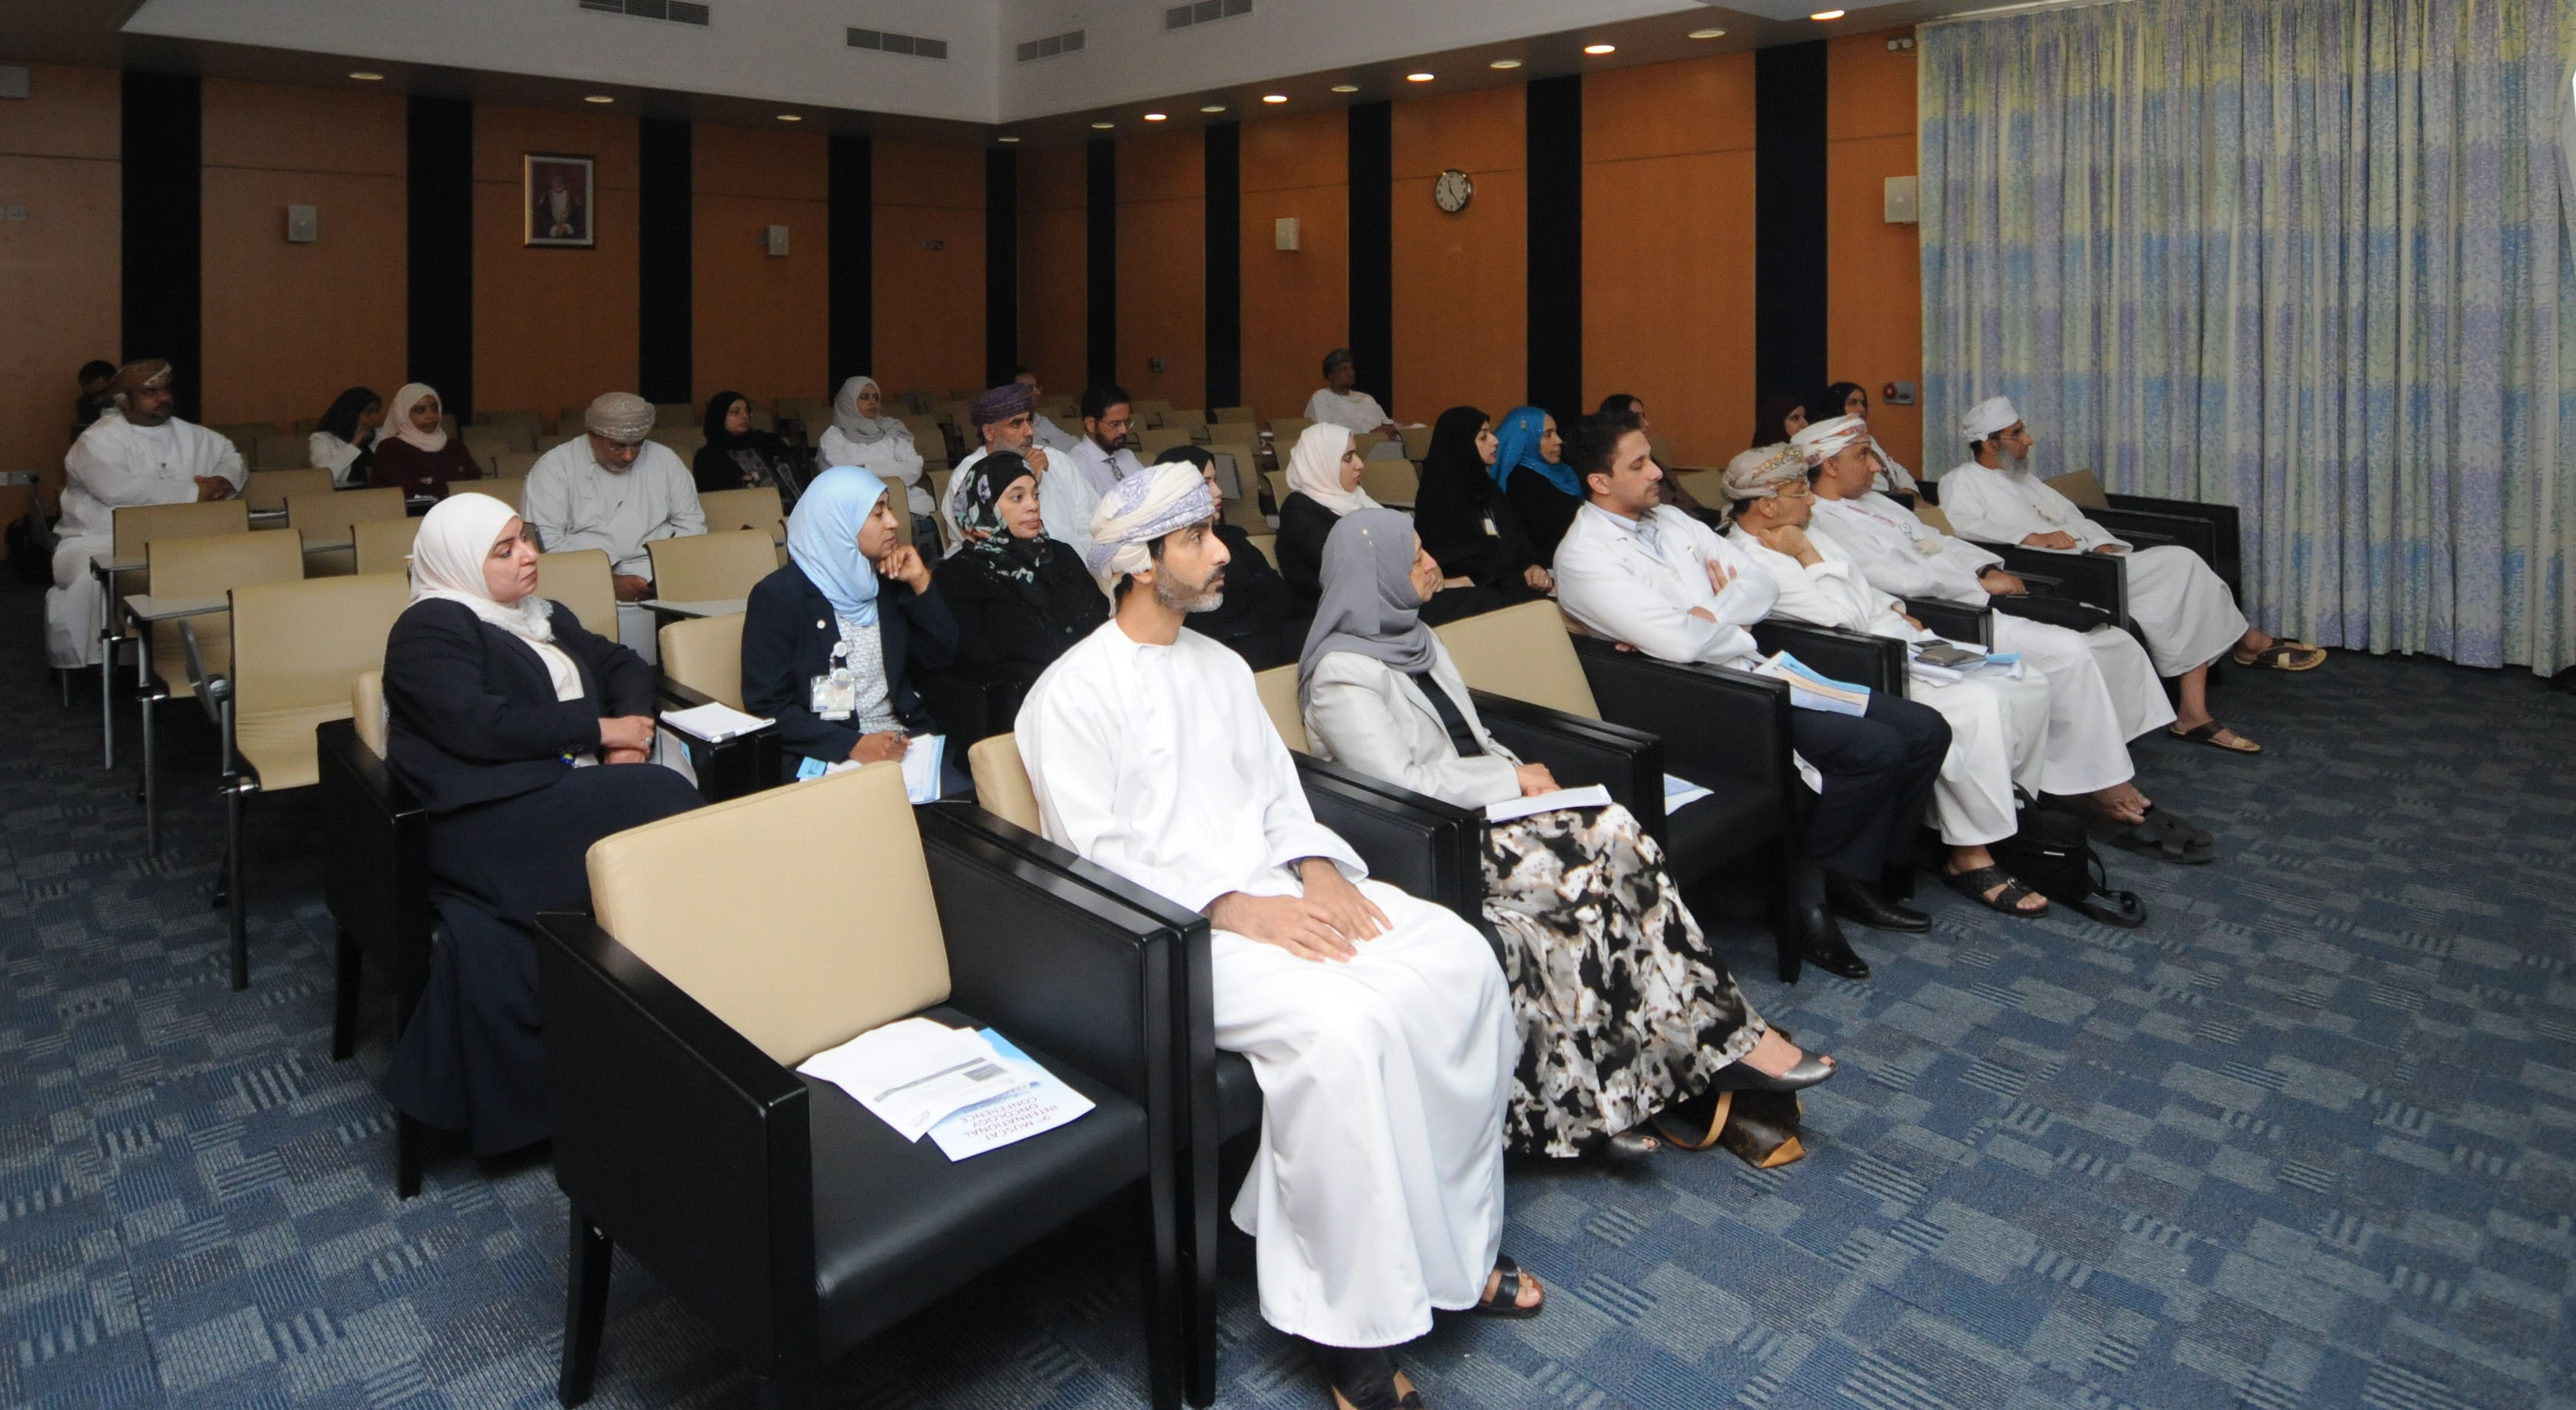 Cancer conference in Oman from Wednesday